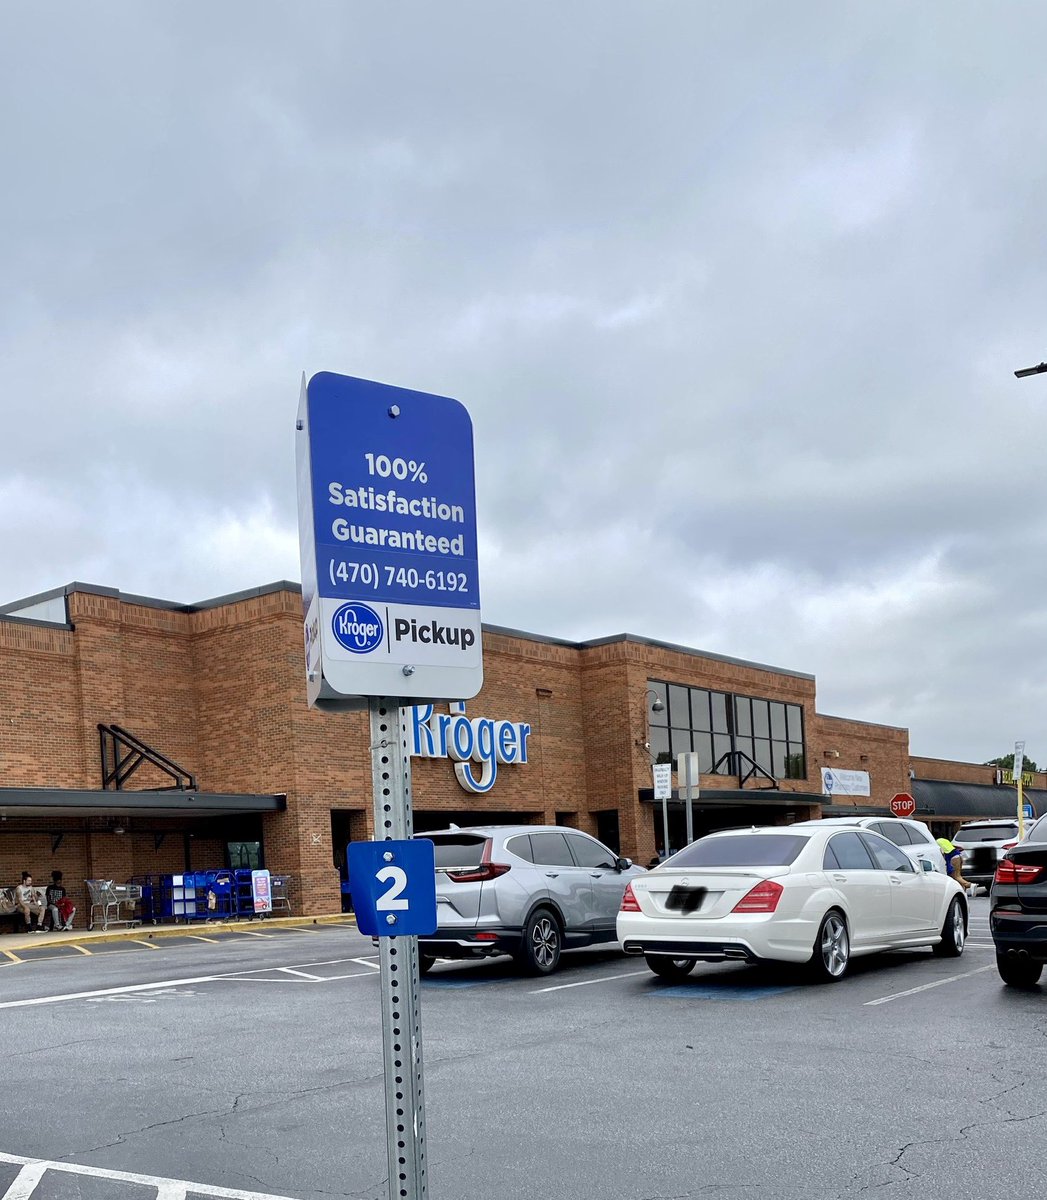 Come on, @kroger #GroceryPickUp in #McDonoughGA! It has taken THREE tries w/ 2 return trips to get my order completed, and that’s after it was delayed for an hour. Lady beside me the 3rd time I was there said she waited over 90mins last time because all the workers walked out.